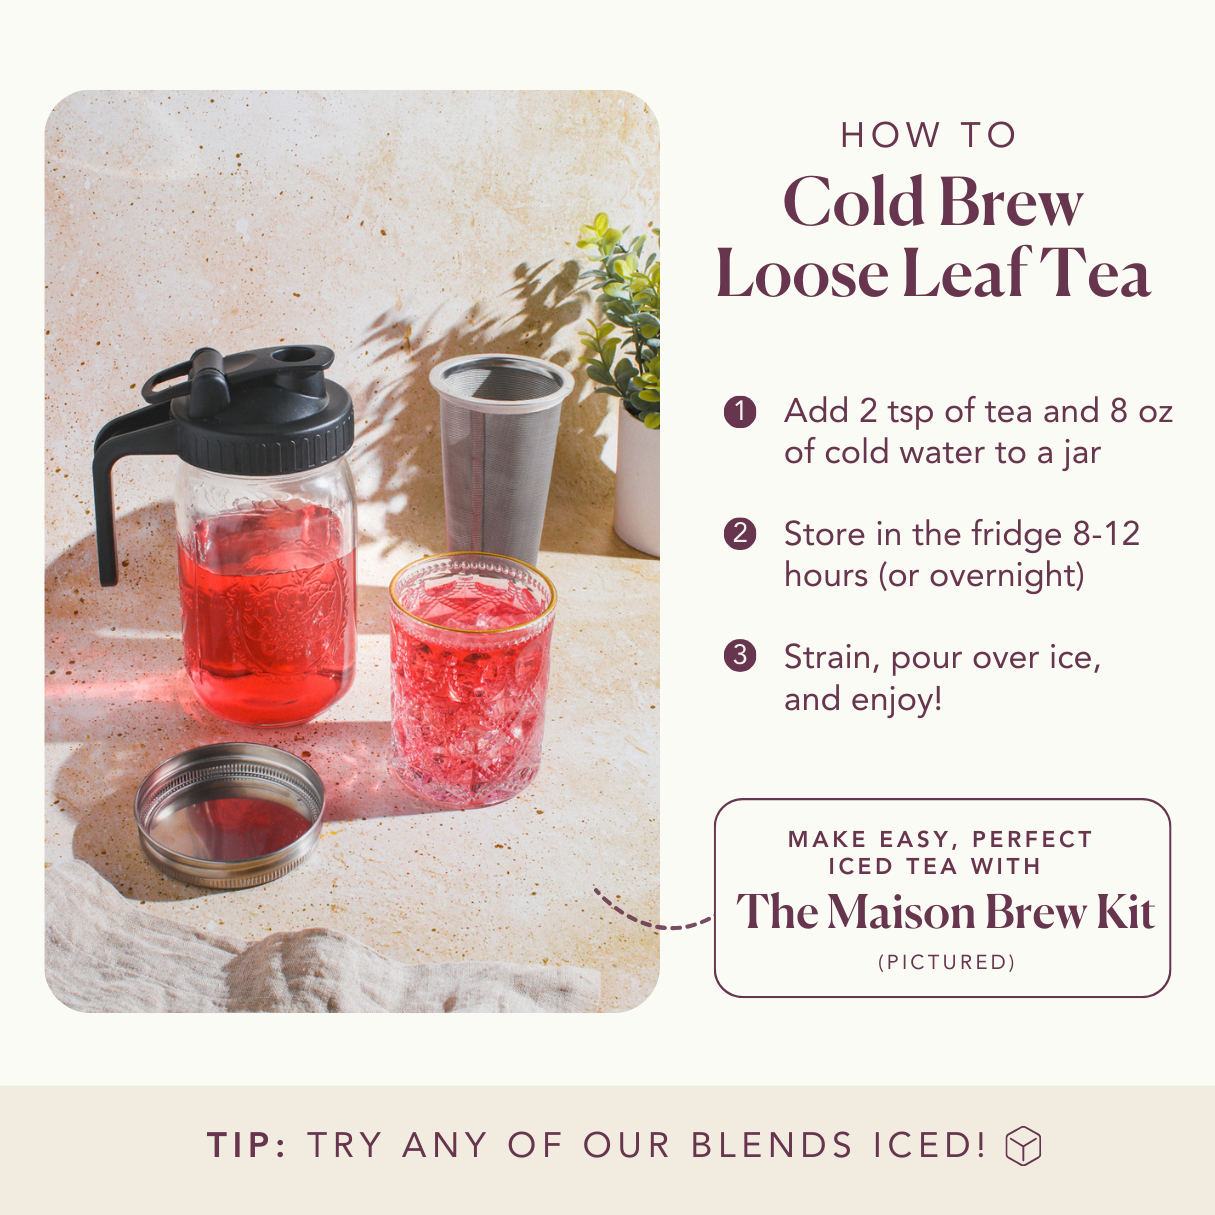 Easy to Be Green Tea (Blueberry - Hibiscus)